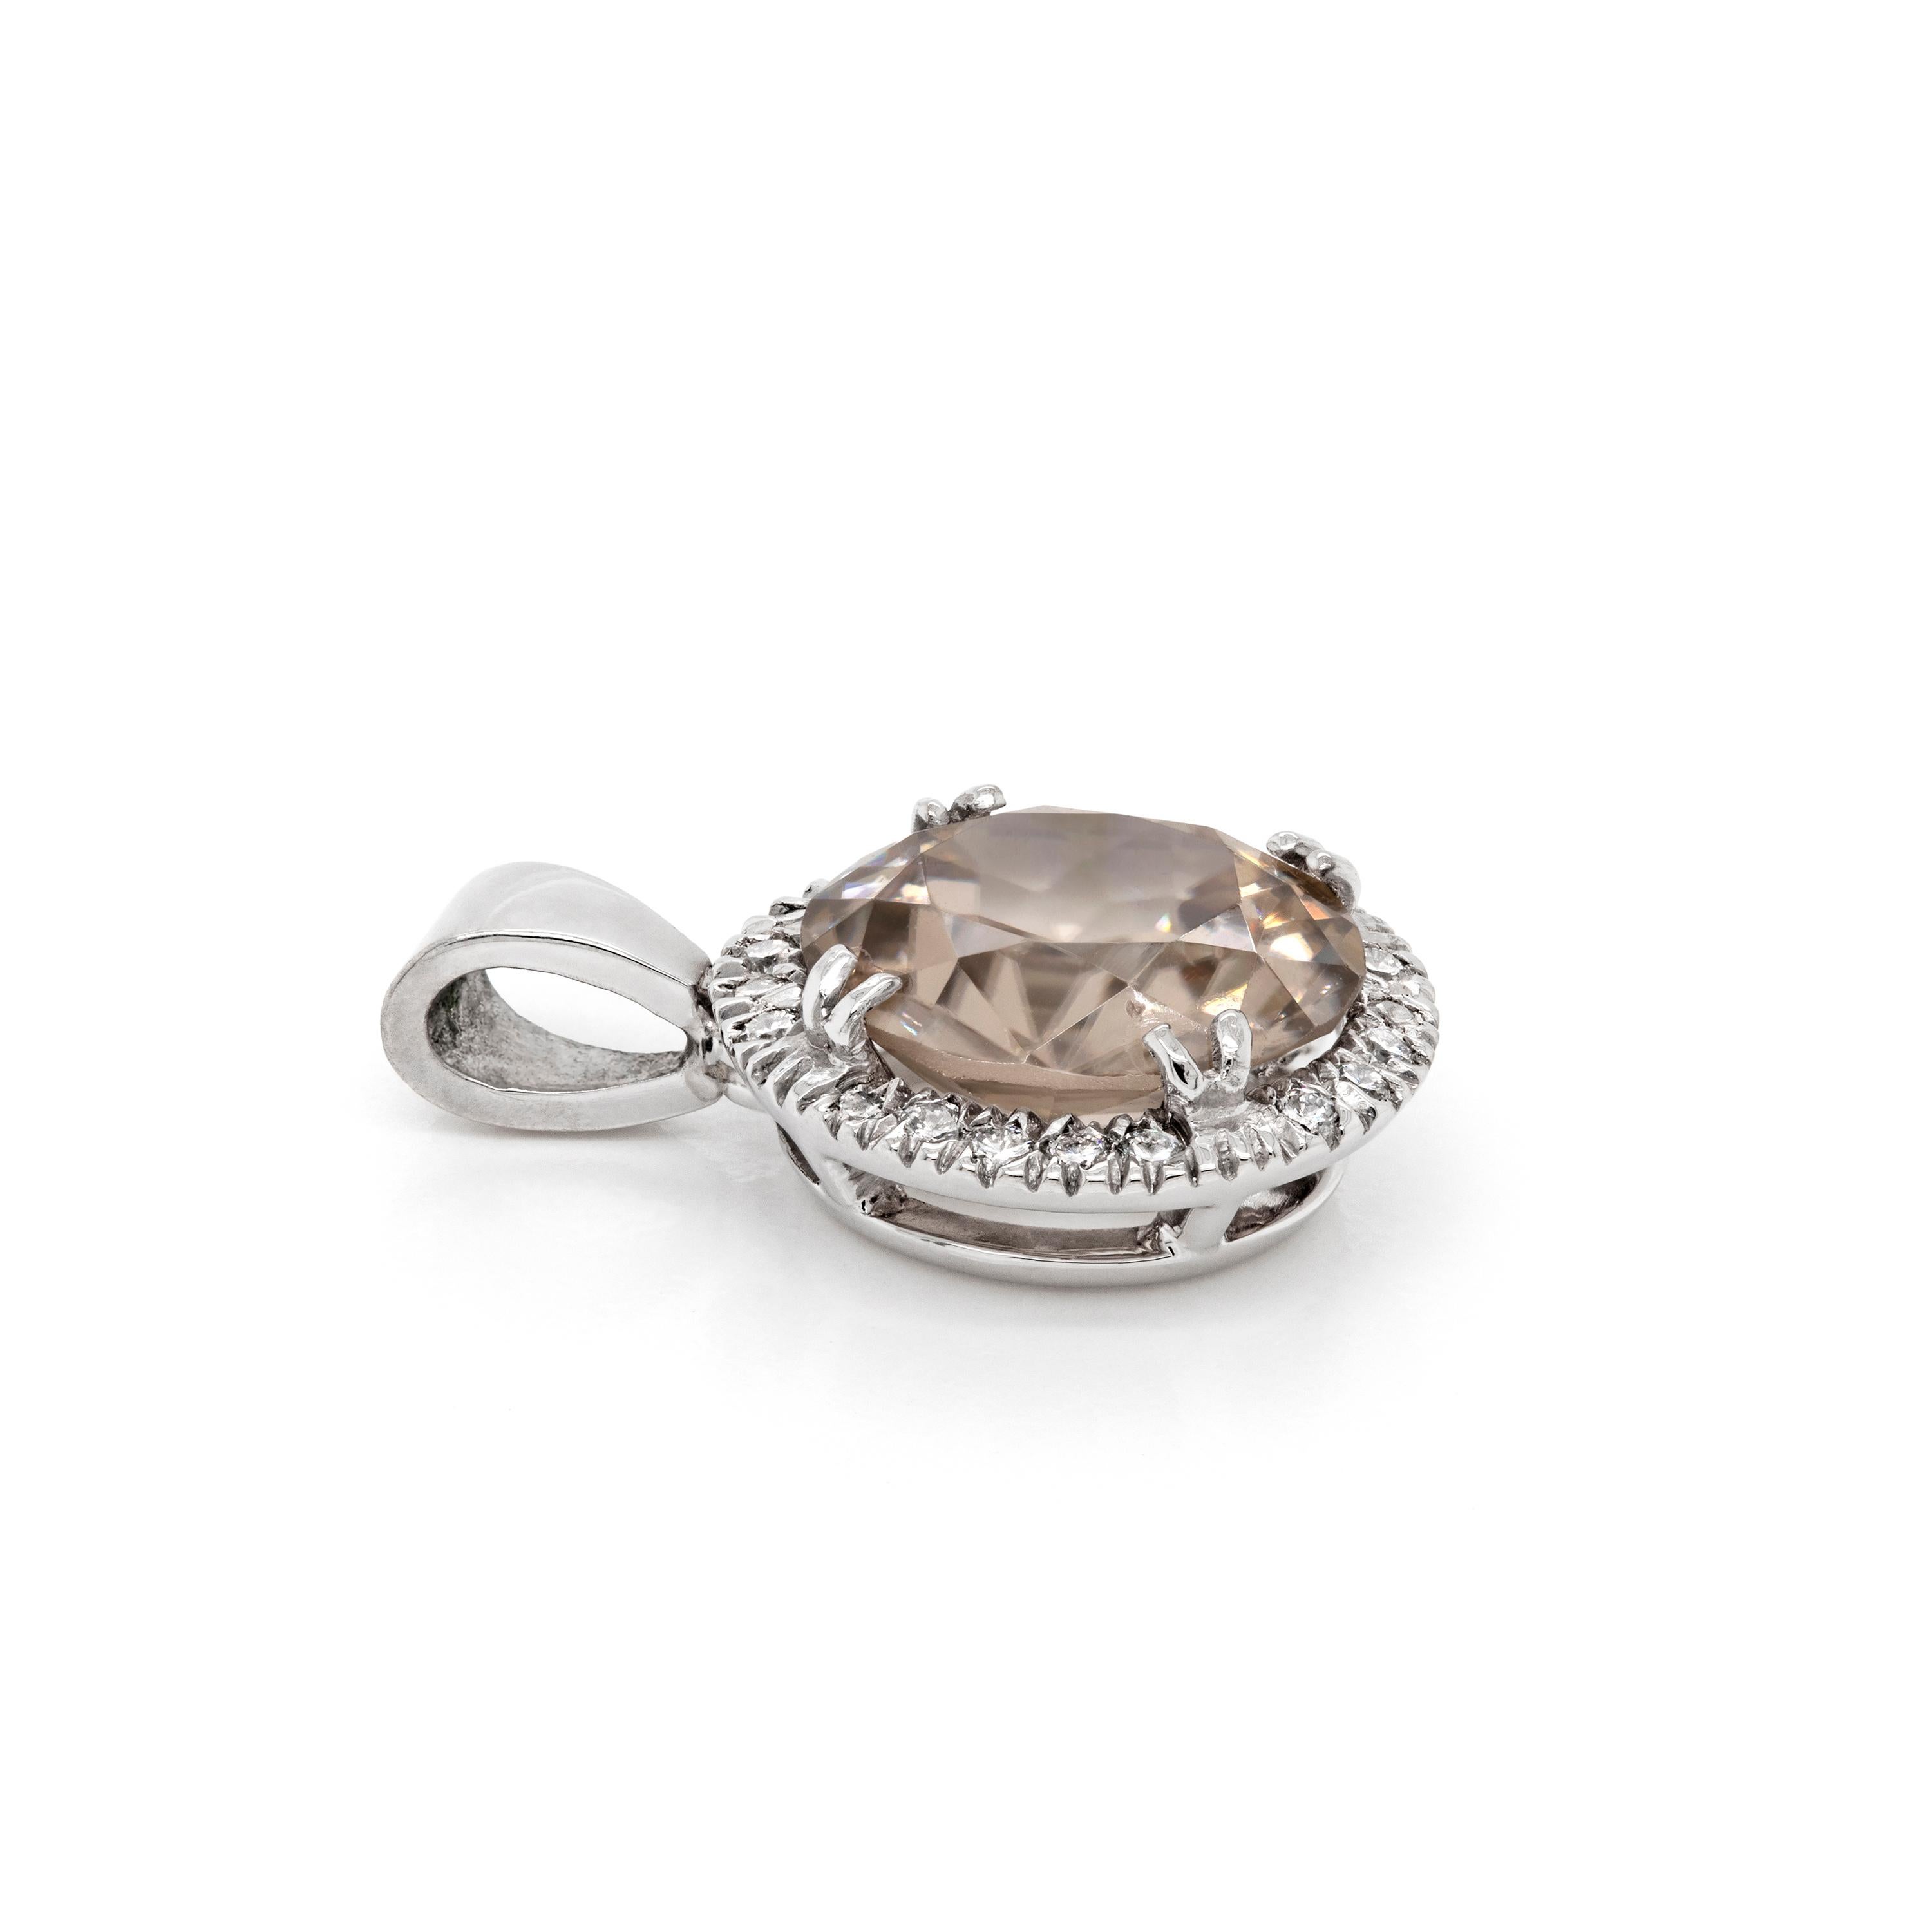 This beautiful piece features a cushion shaped Zircon weighing 4.25ct mounted in a four claw, open back setting. The gemstone is beautifully surrounded by a halo of 20 round brilliant cut diamonds weighing a total of 0.20ct all mounted in platinum.